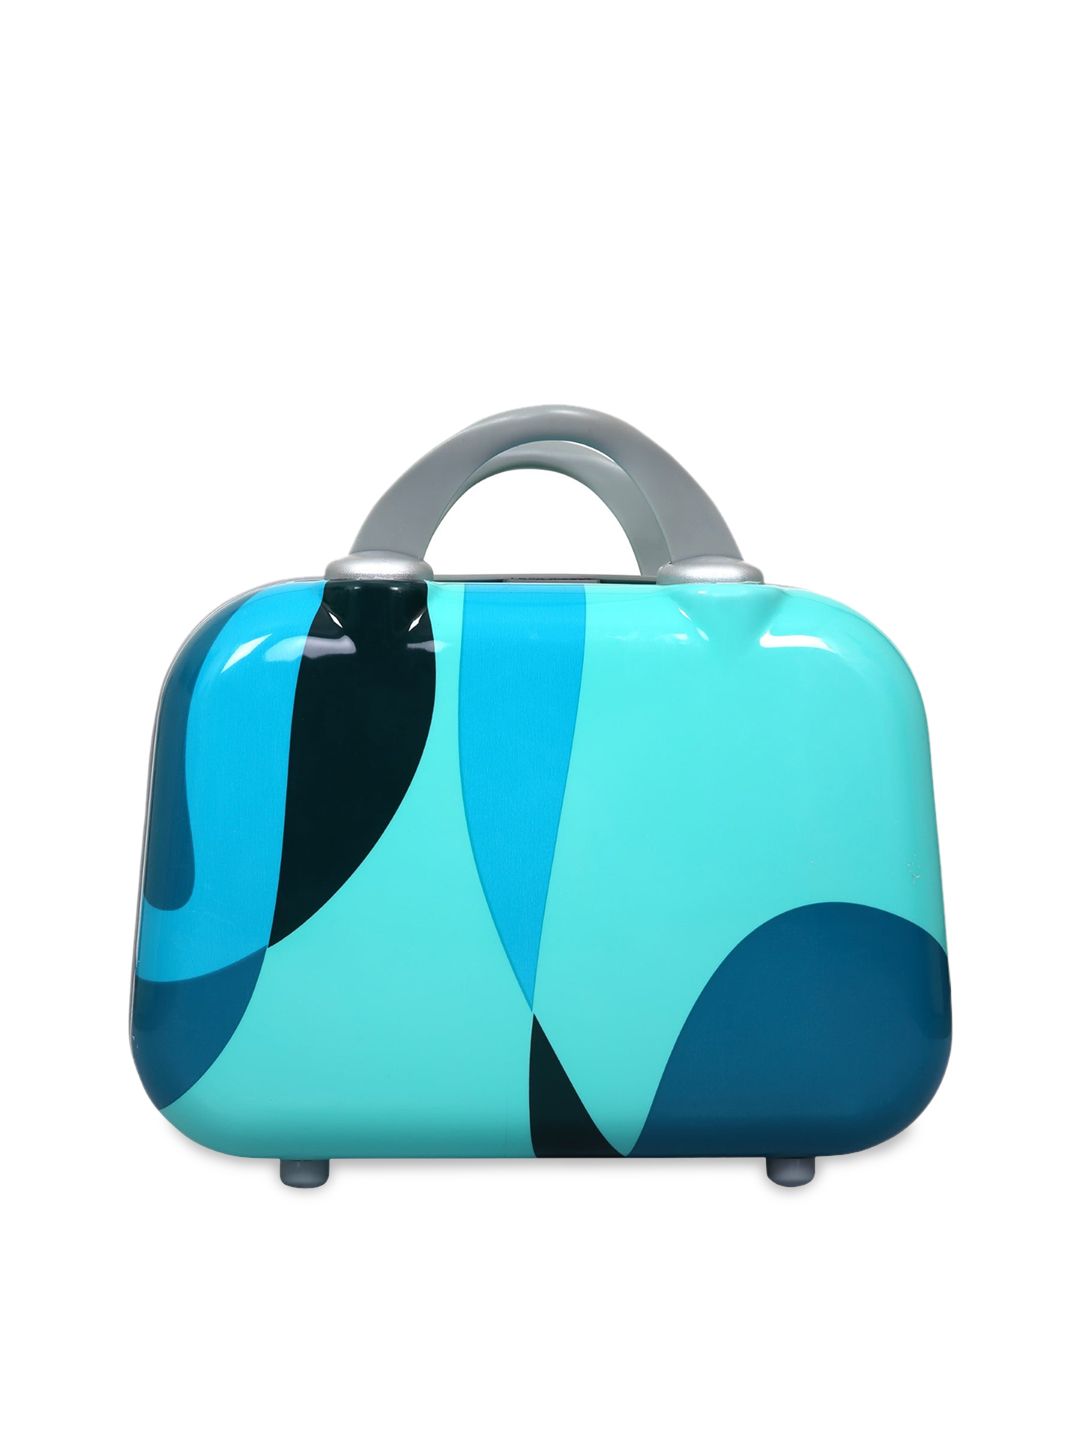 Polo Class Blue & Black Printed Hard Sided Trolley Bag Price in India